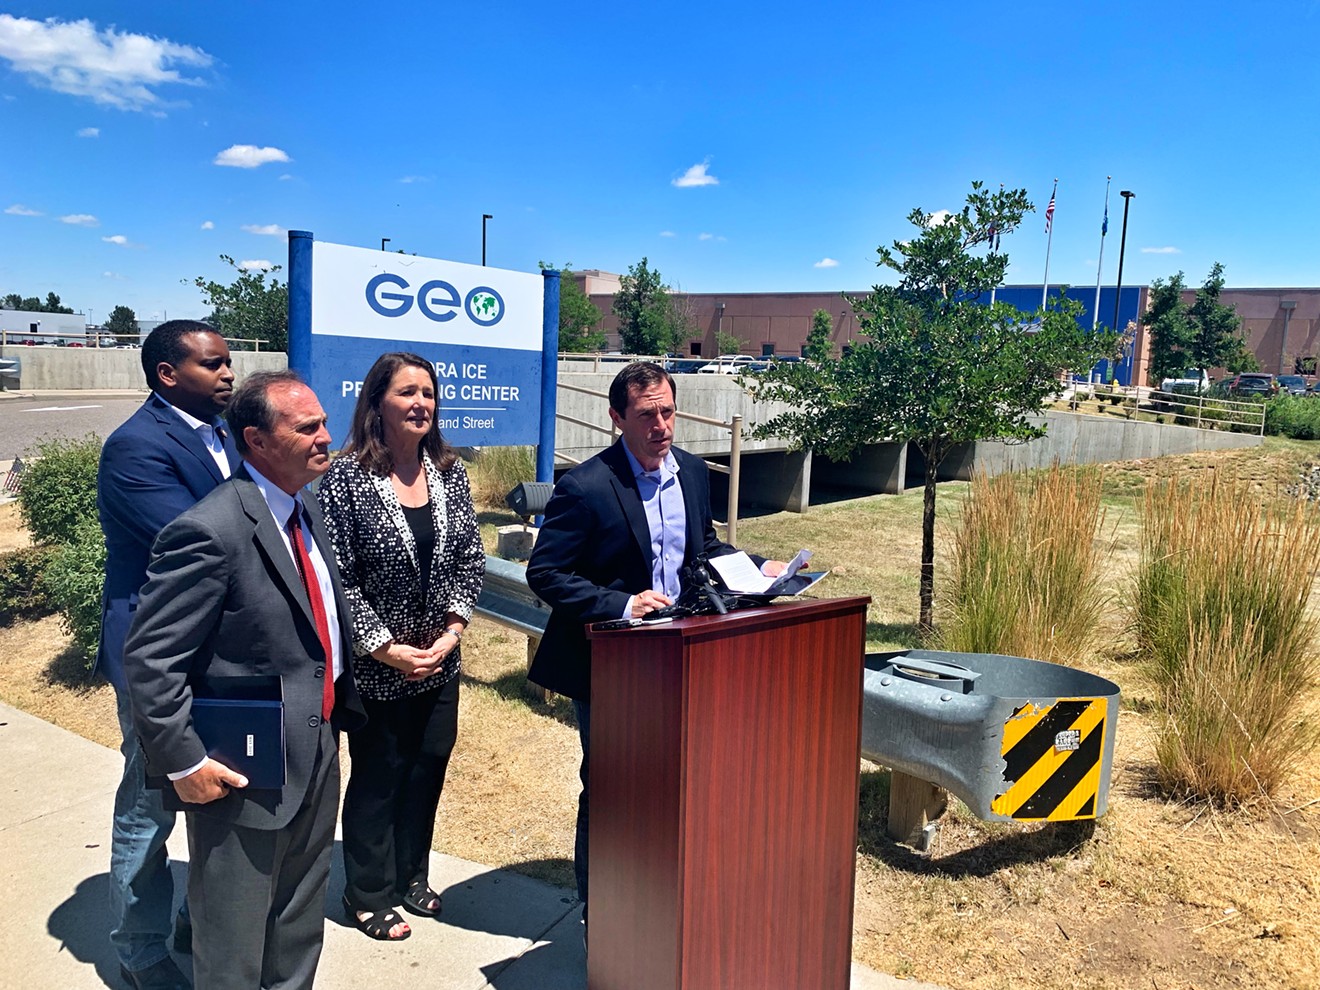 Colorado's Democratic members of the House of Representatives toured the GEO immigration detention facility on July 22.